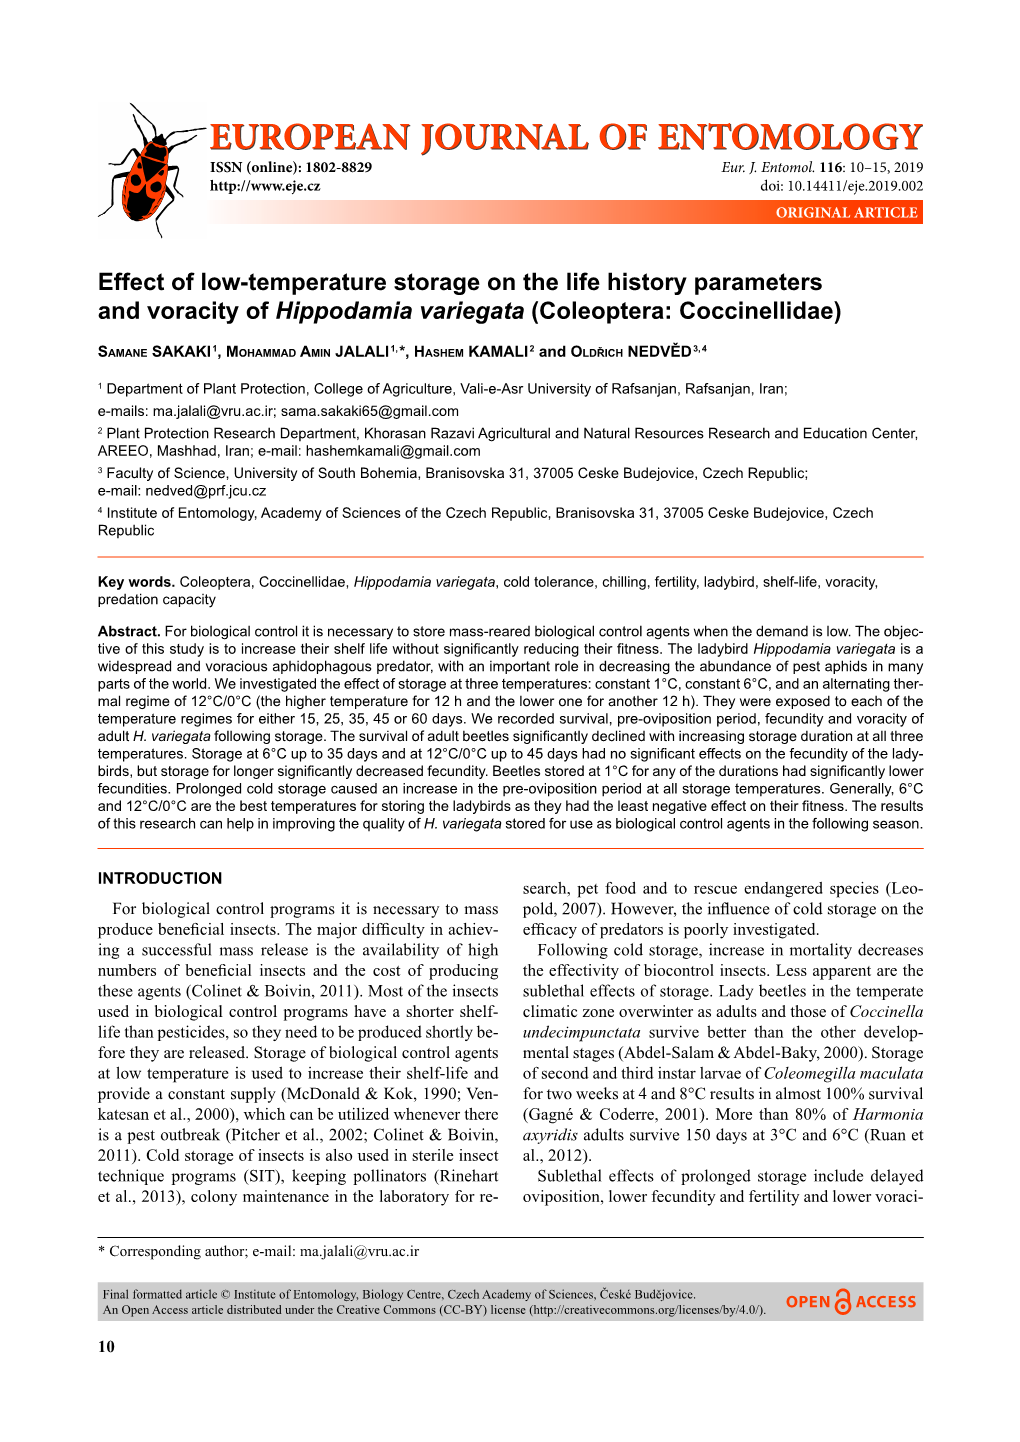 Effect of Low-Temperature Storage on the Life History Parameters and Voracity of Hippodamia Variegata (Coleoptera: Coccinellidae)